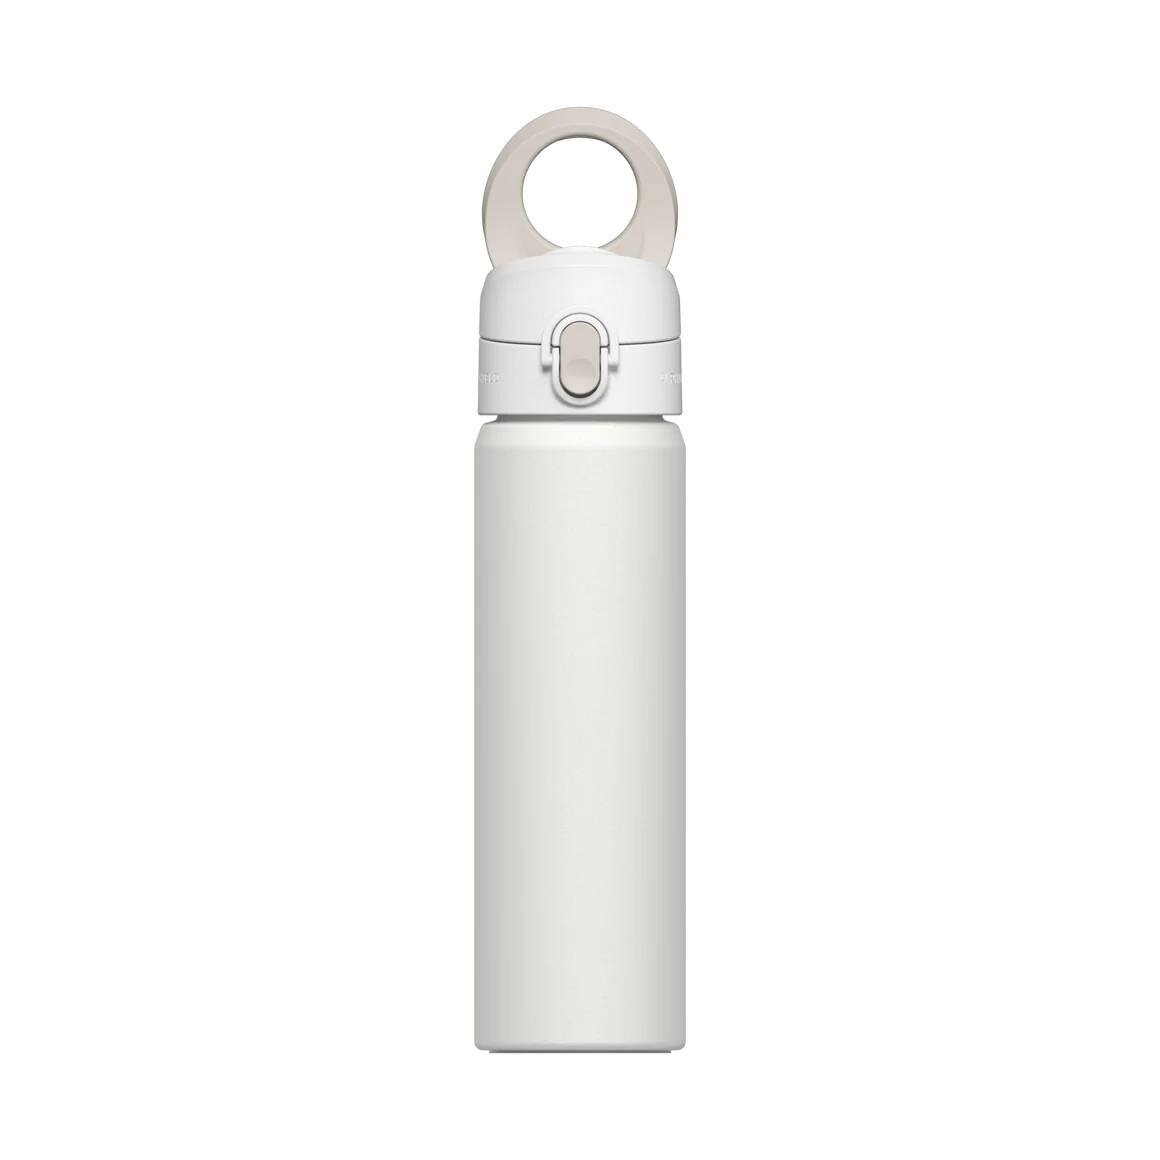 https://www.tejar.com/media/catalog/product/cache/1/image/9df78eab33525d08d6e5fb8d27136e95/r/h/rhinoshield_aquastand_bottle_with_magsafe_compatible_phone_grip_-_white_-_stainless_steel.jpg